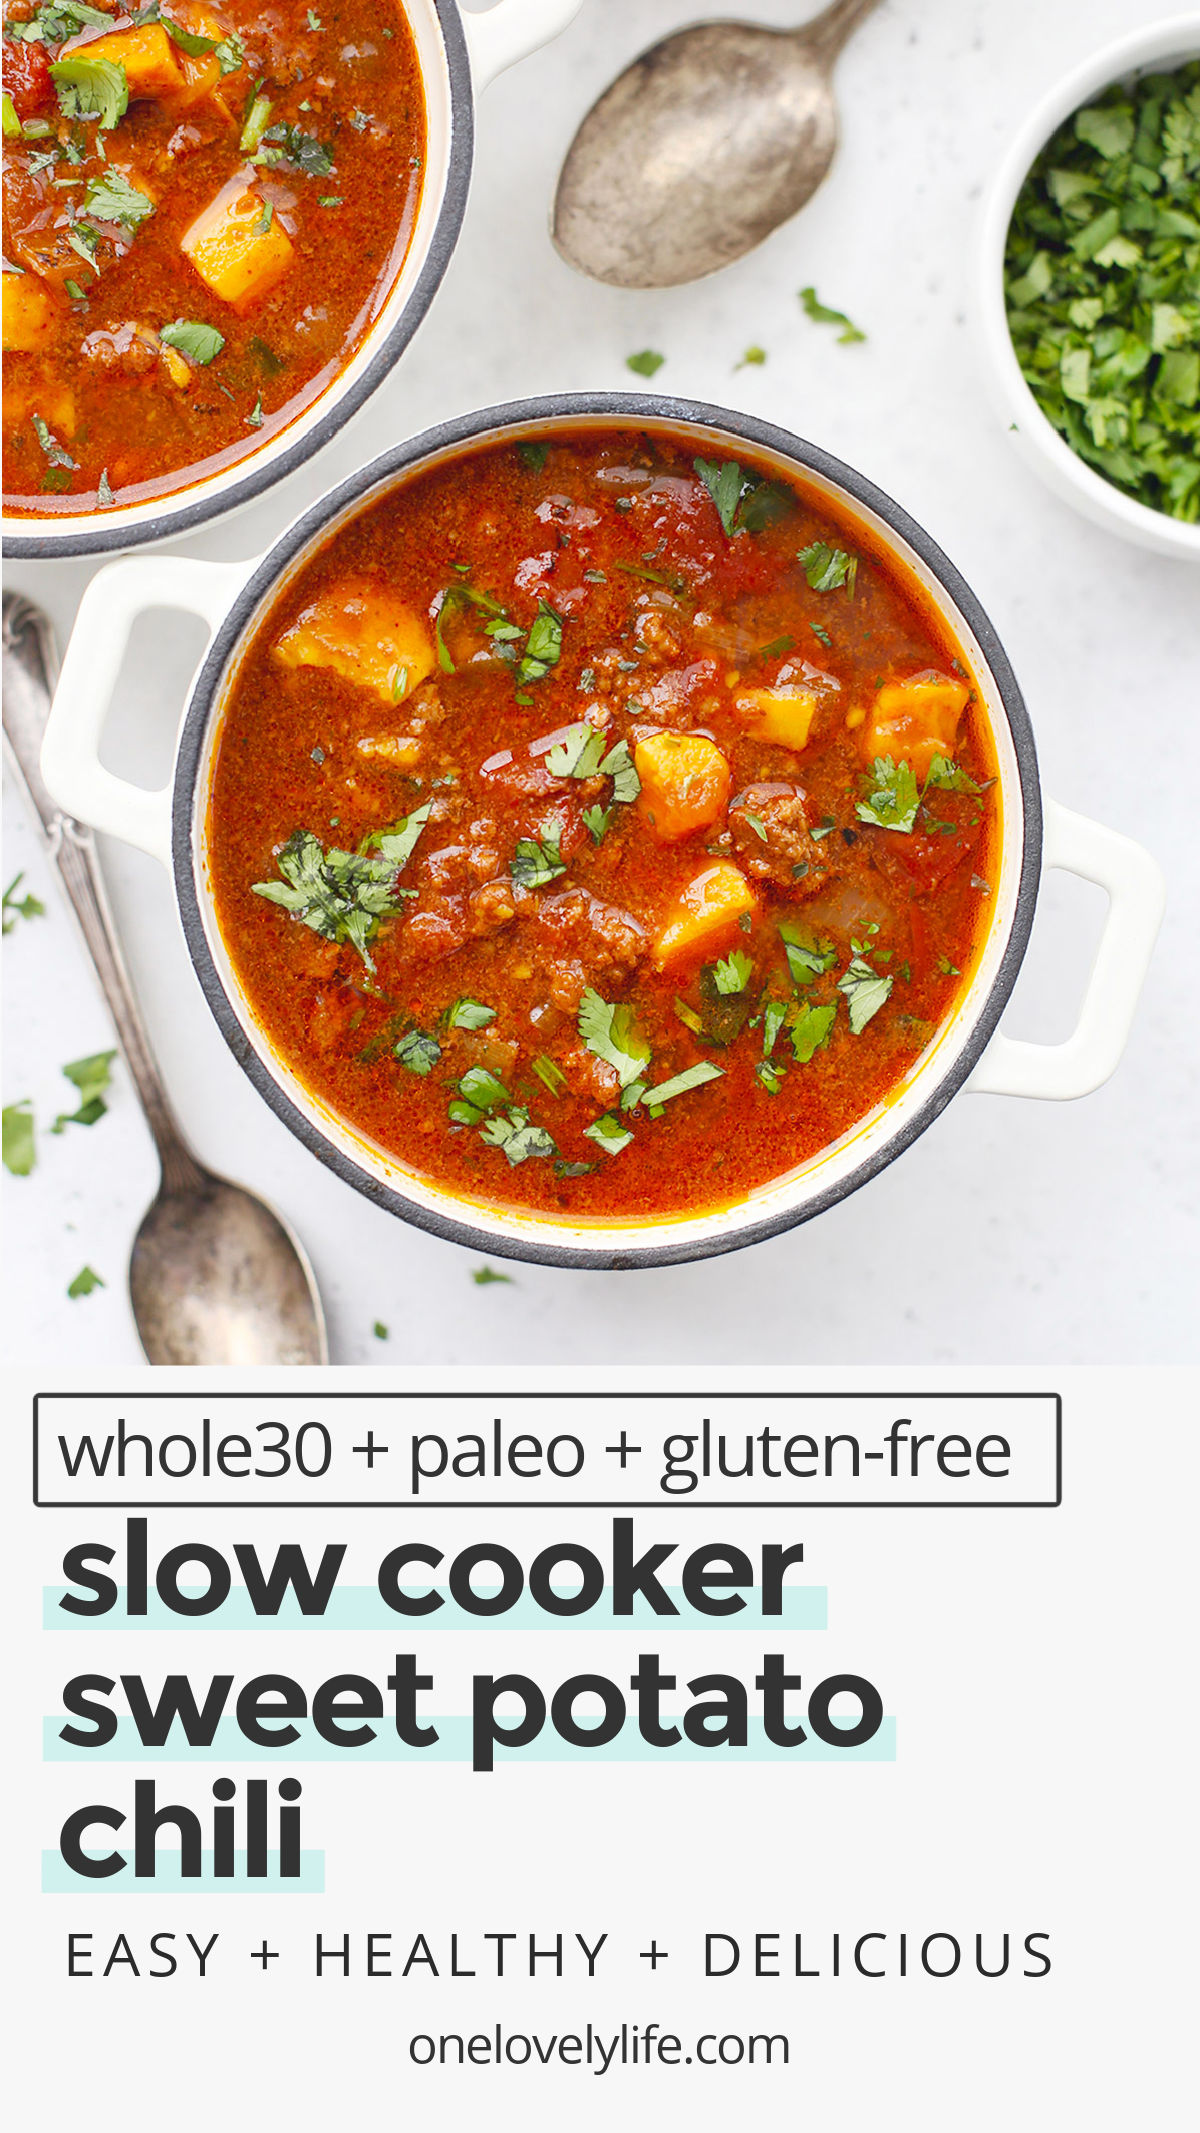 Slow Cooker Sweet Potato Chili - This paleo sweet potato chili recipe is one of our favorites. It tastes even better the next day! (Gluten-Free, Whole30) // Whole30 chili // crock pot sweet potato chili // paleo chili // chili no beans // chili without beans // healthy chili //